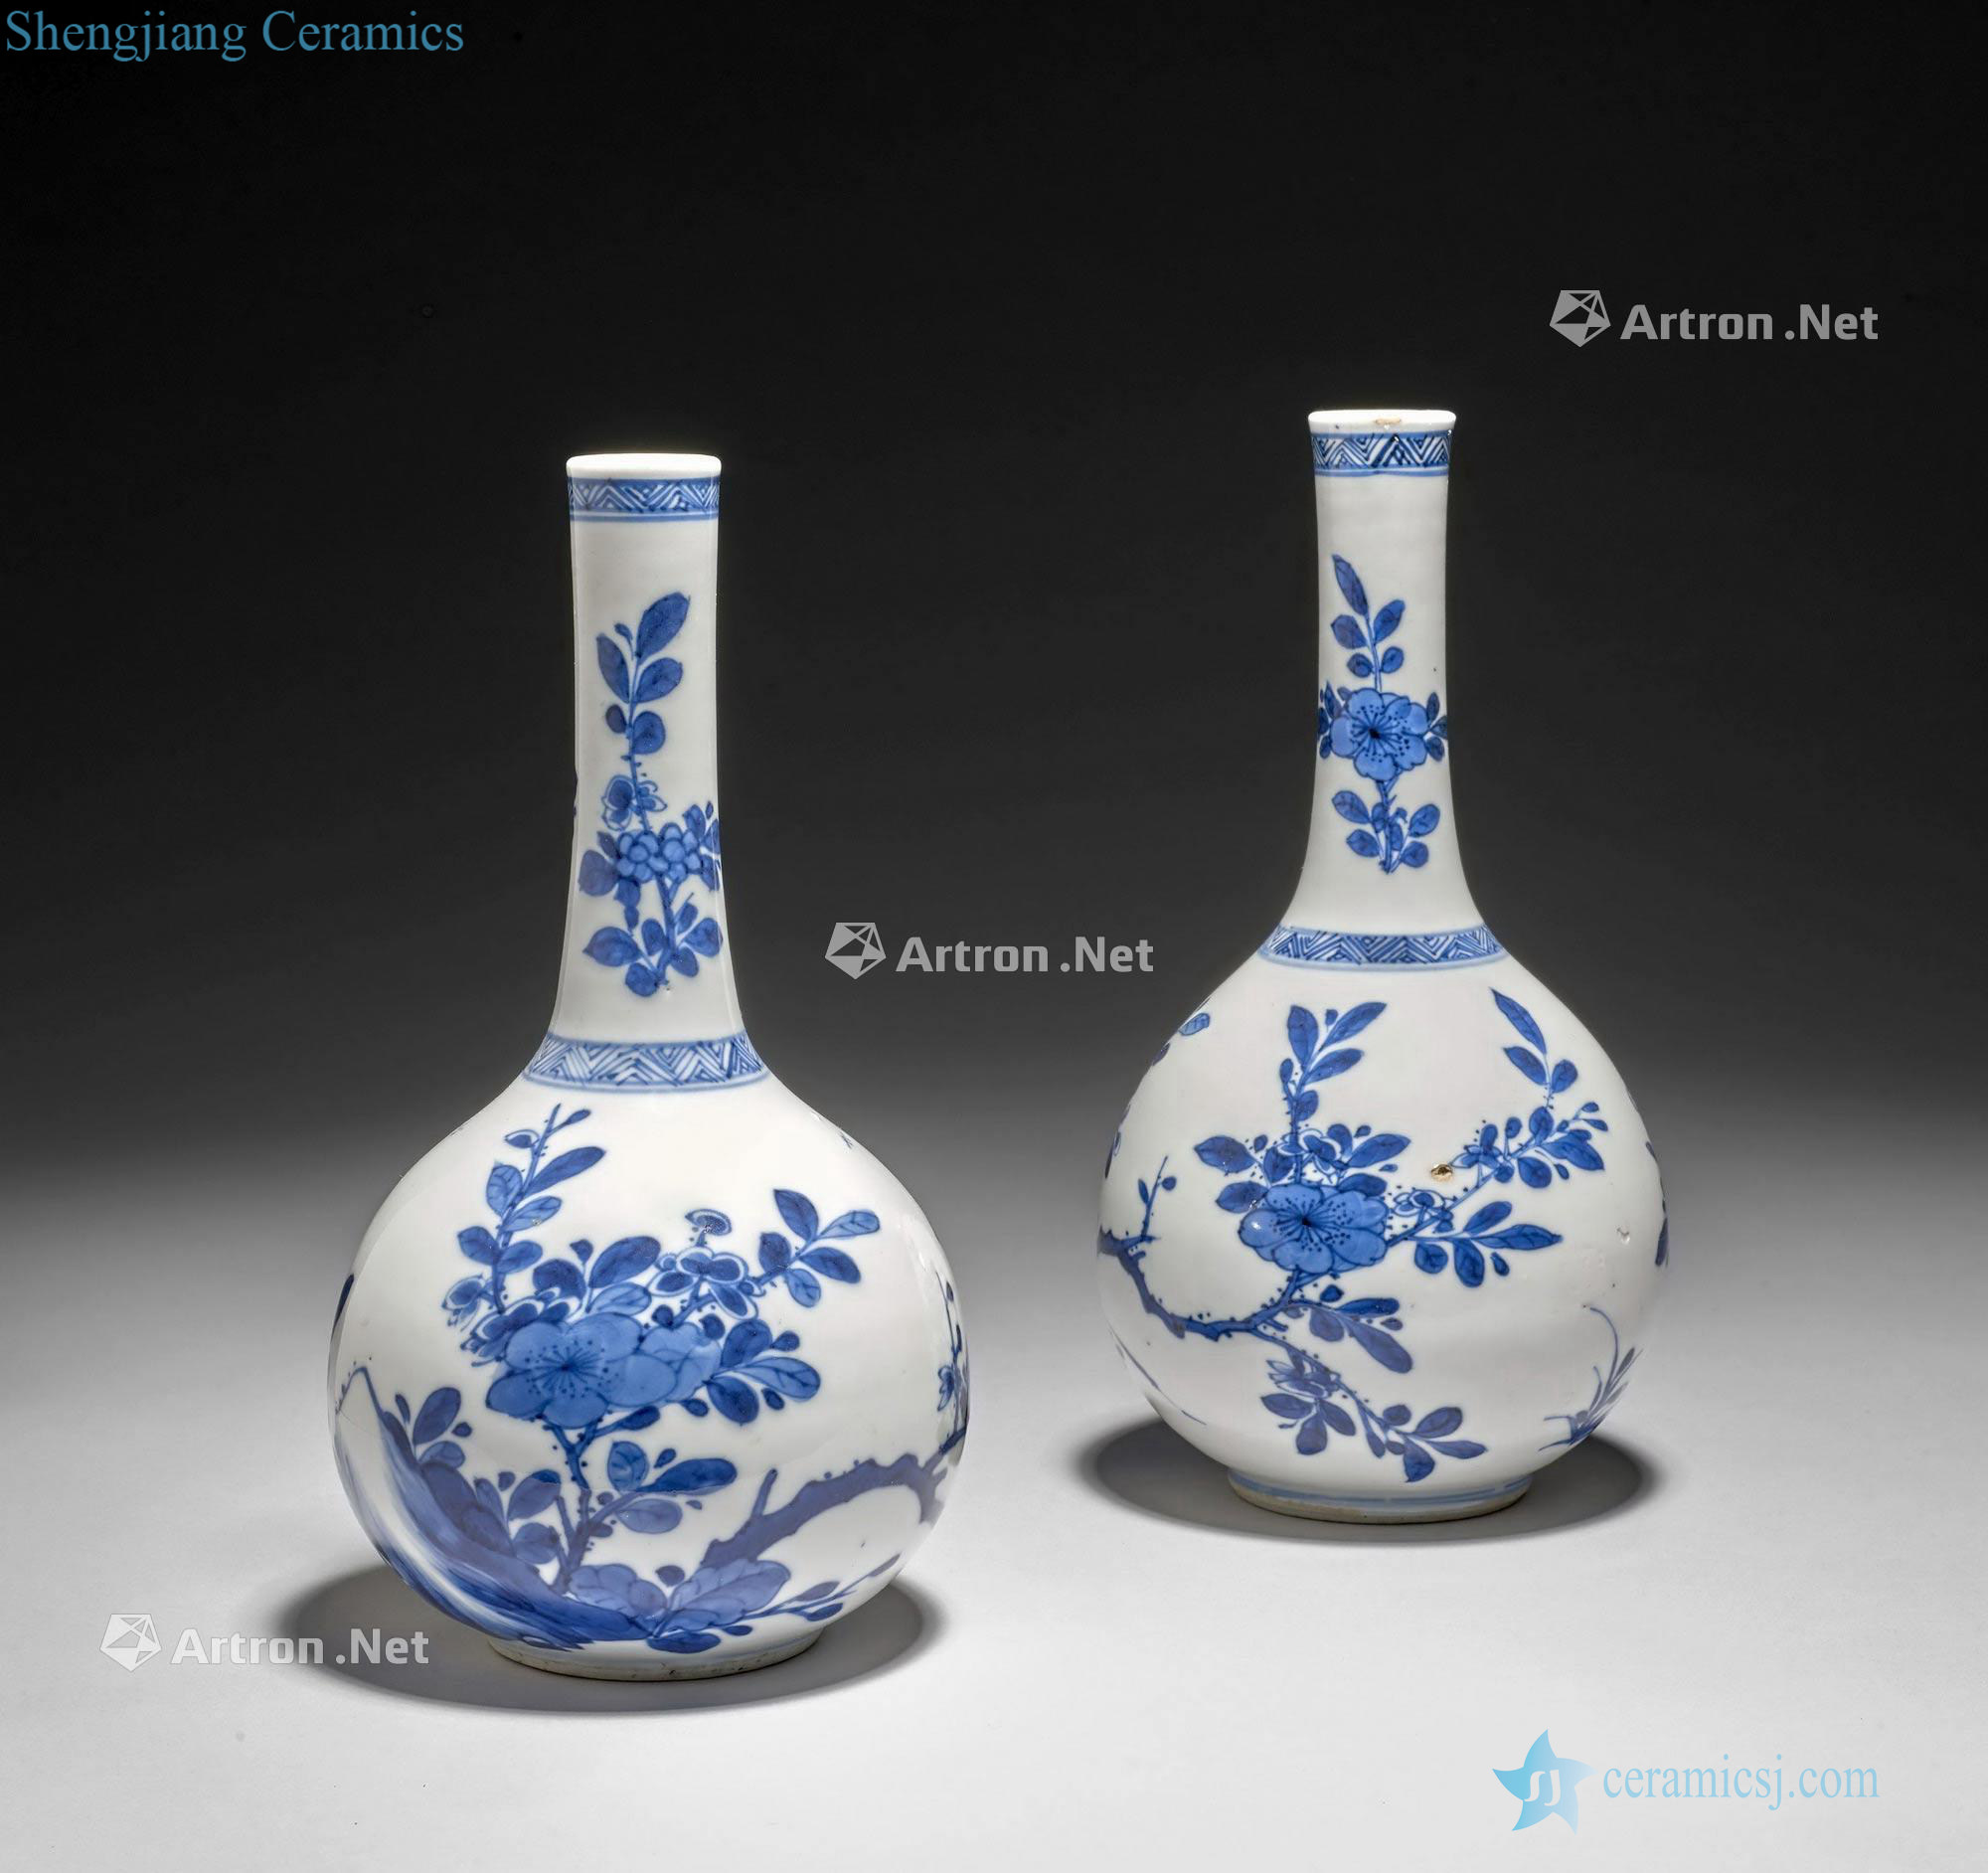 China, the Qing dynasty, Kangxi period (1662-1722), A pair of blue and white porcelain vases